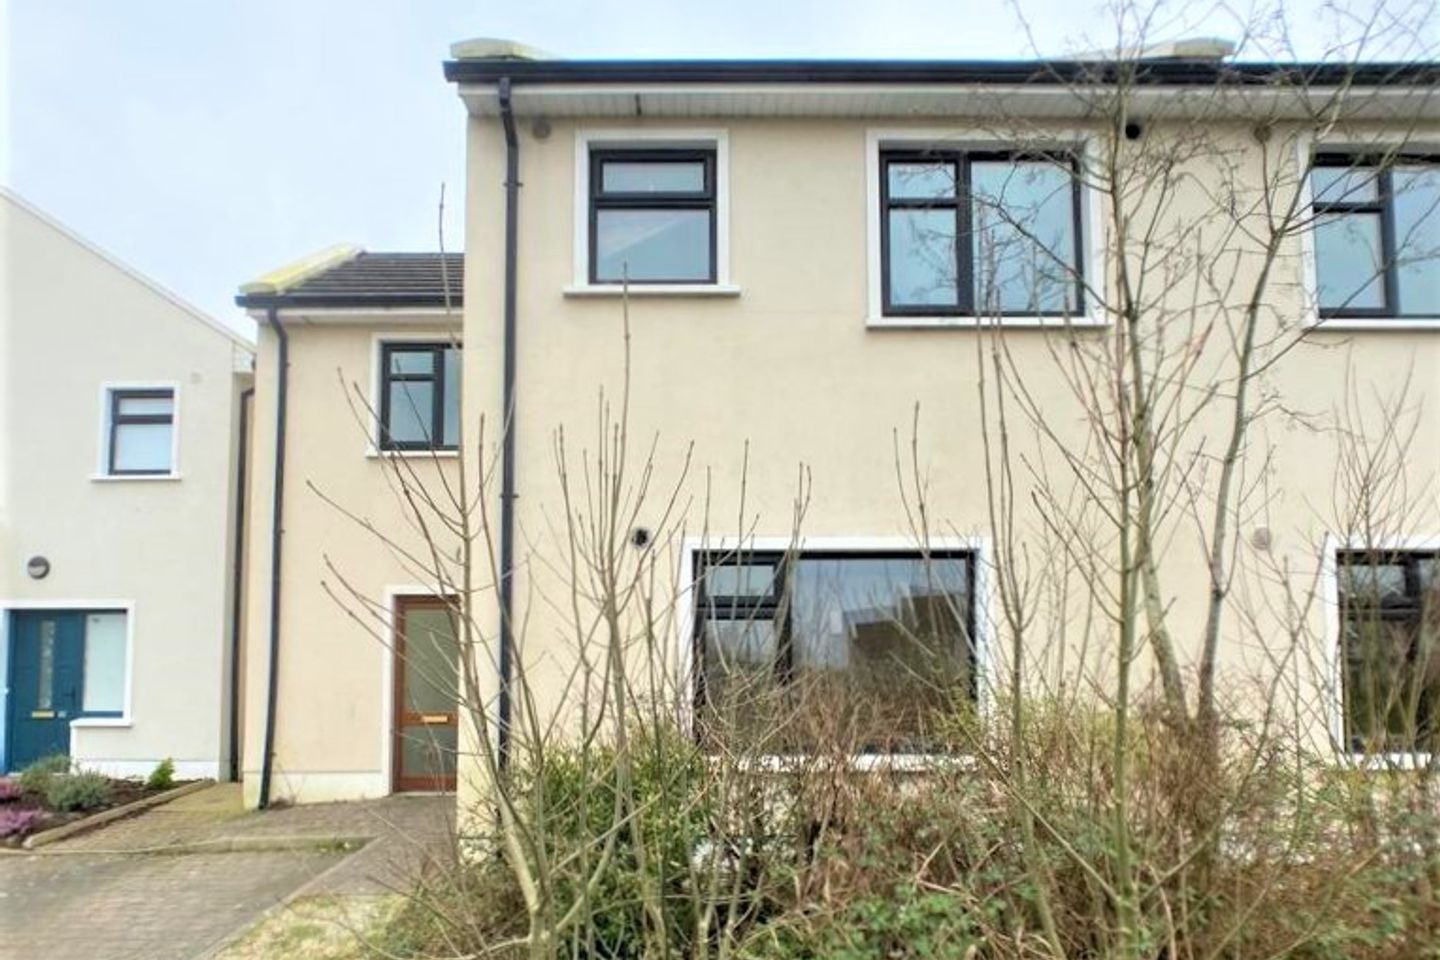 56 Country Meadows, Cloontooa, Tuam, Co. Galway